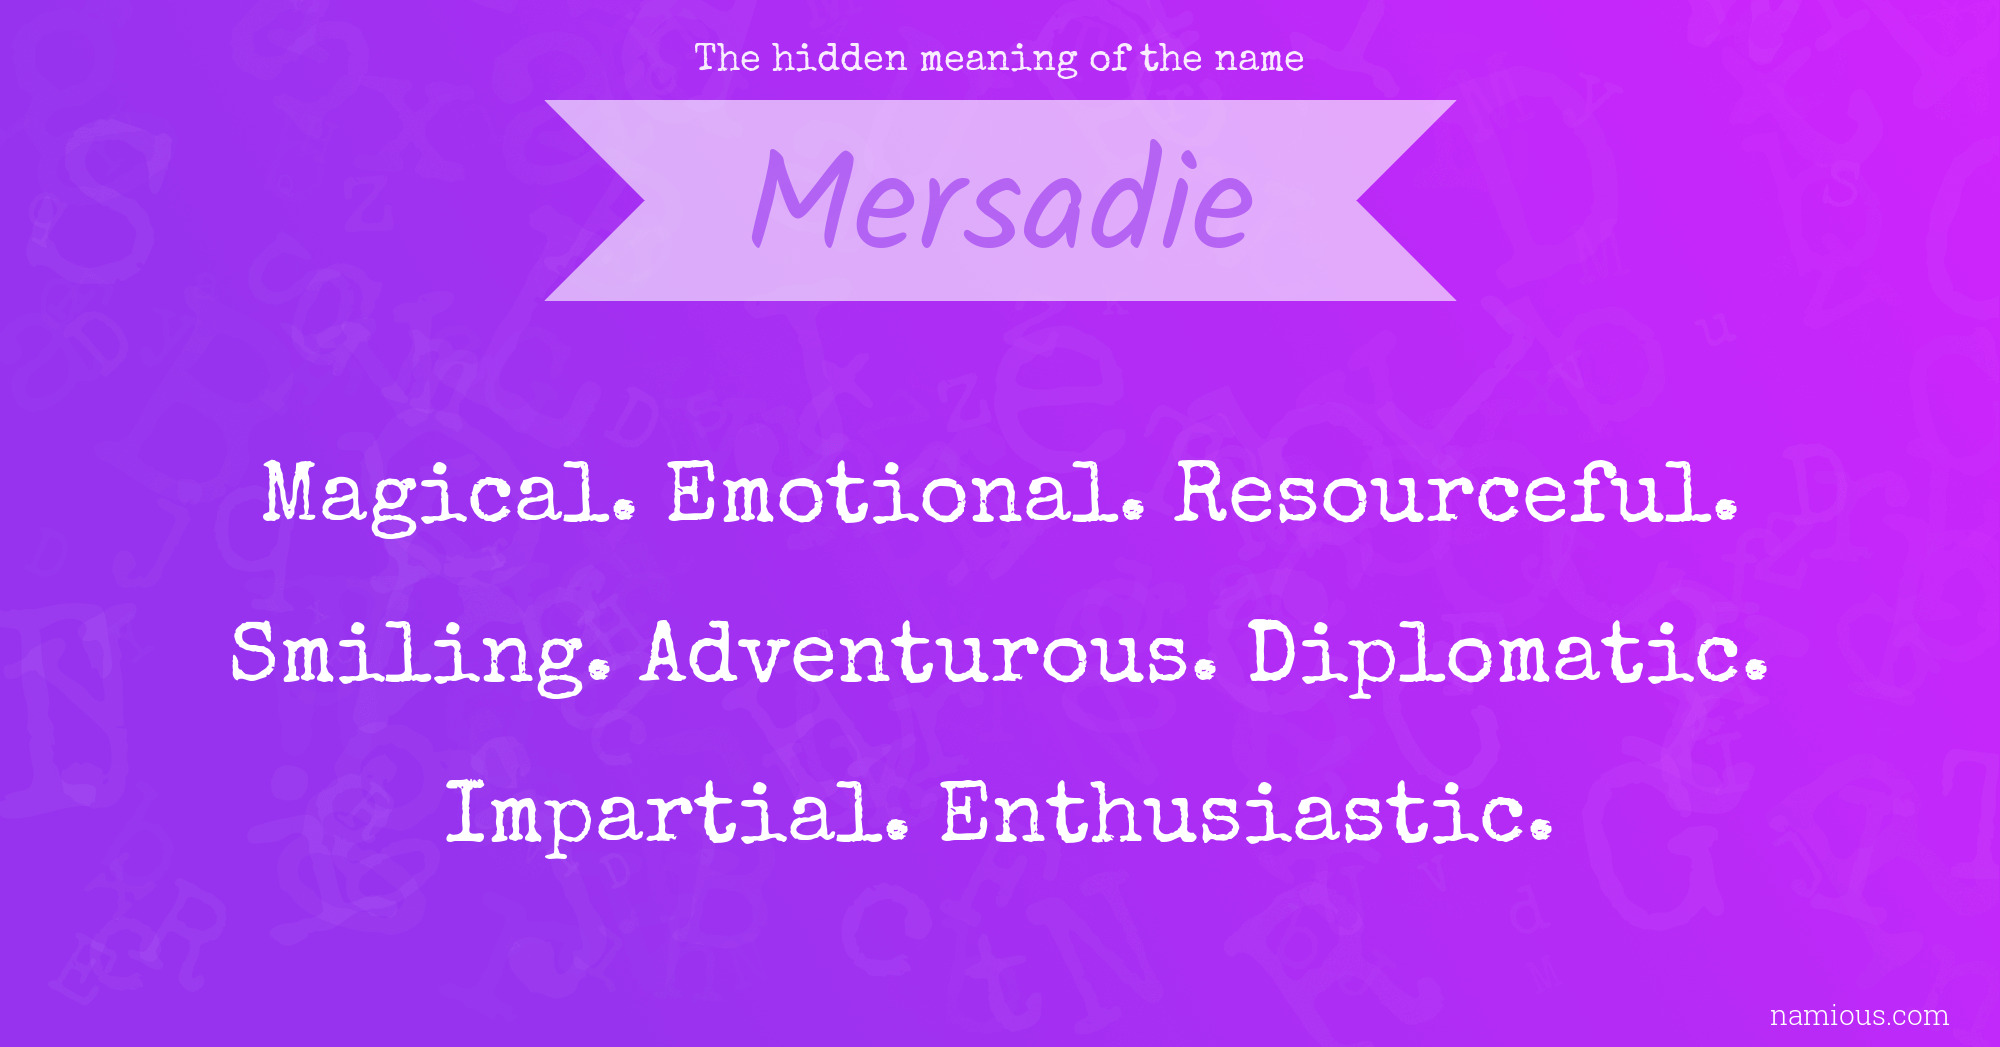 The hidden meaning of the name Mersadie